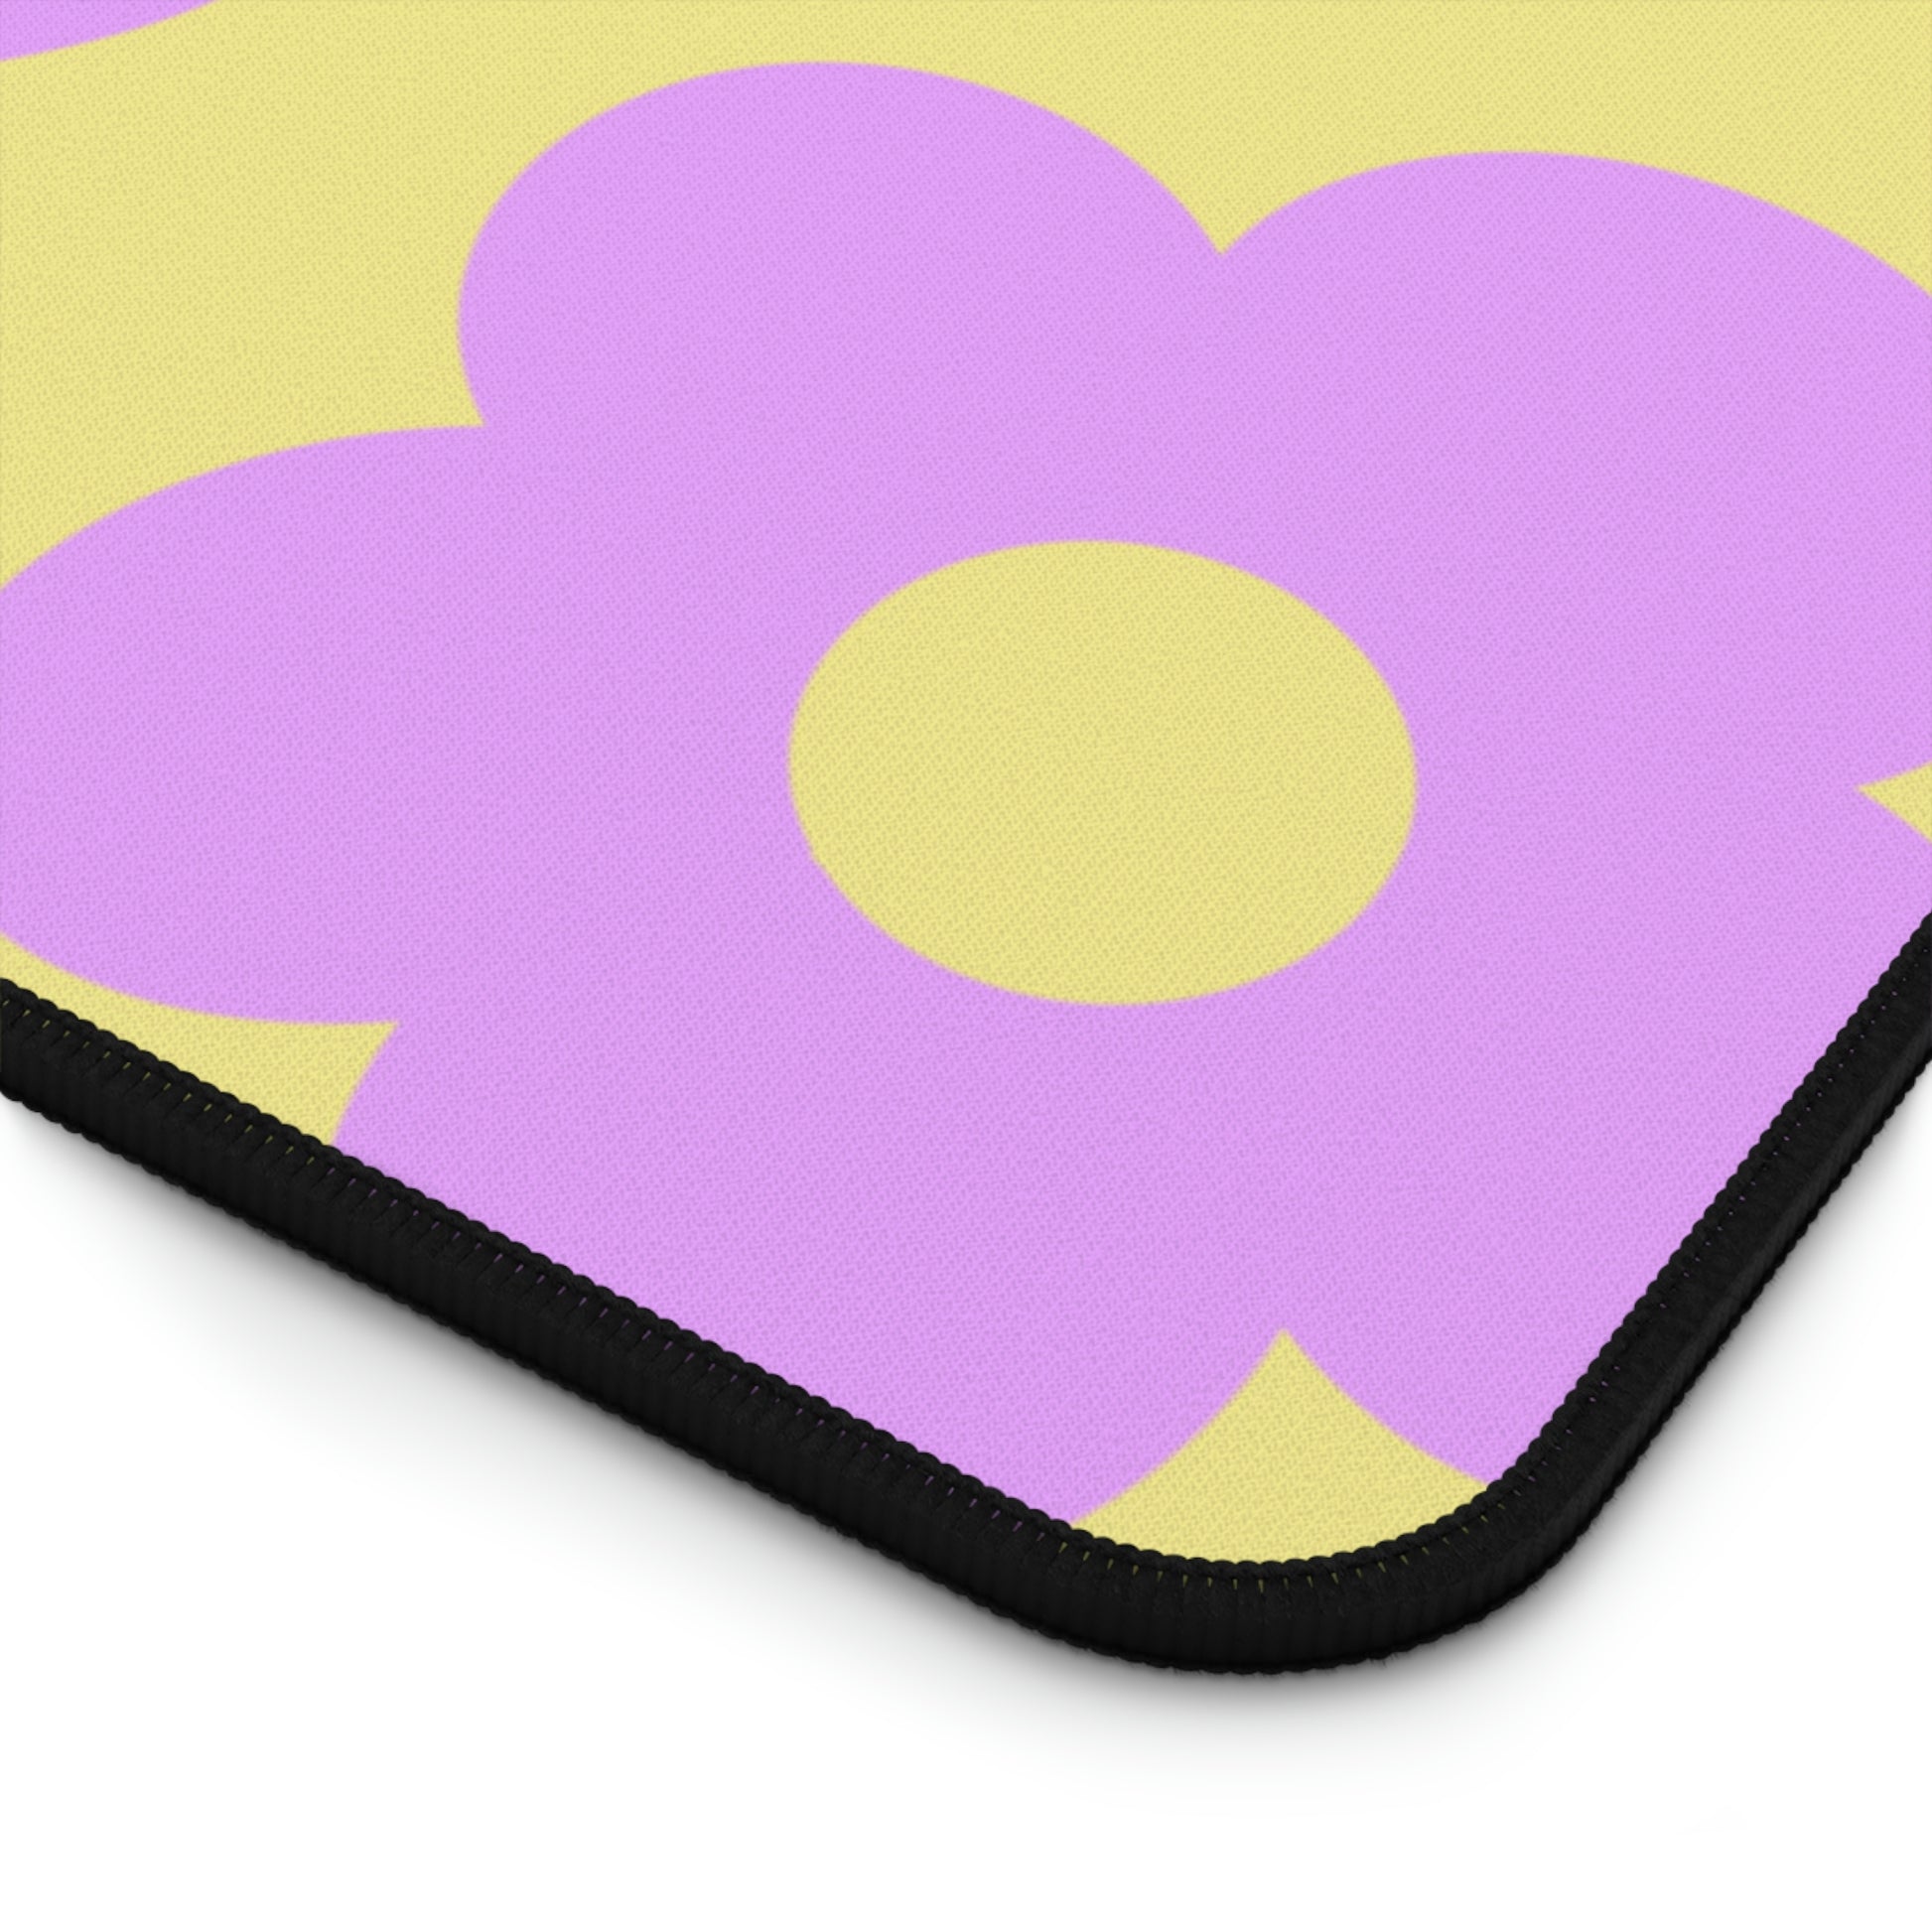 The corner of a 31" x 15.5" desk mat with purple flowers on a yellow background.